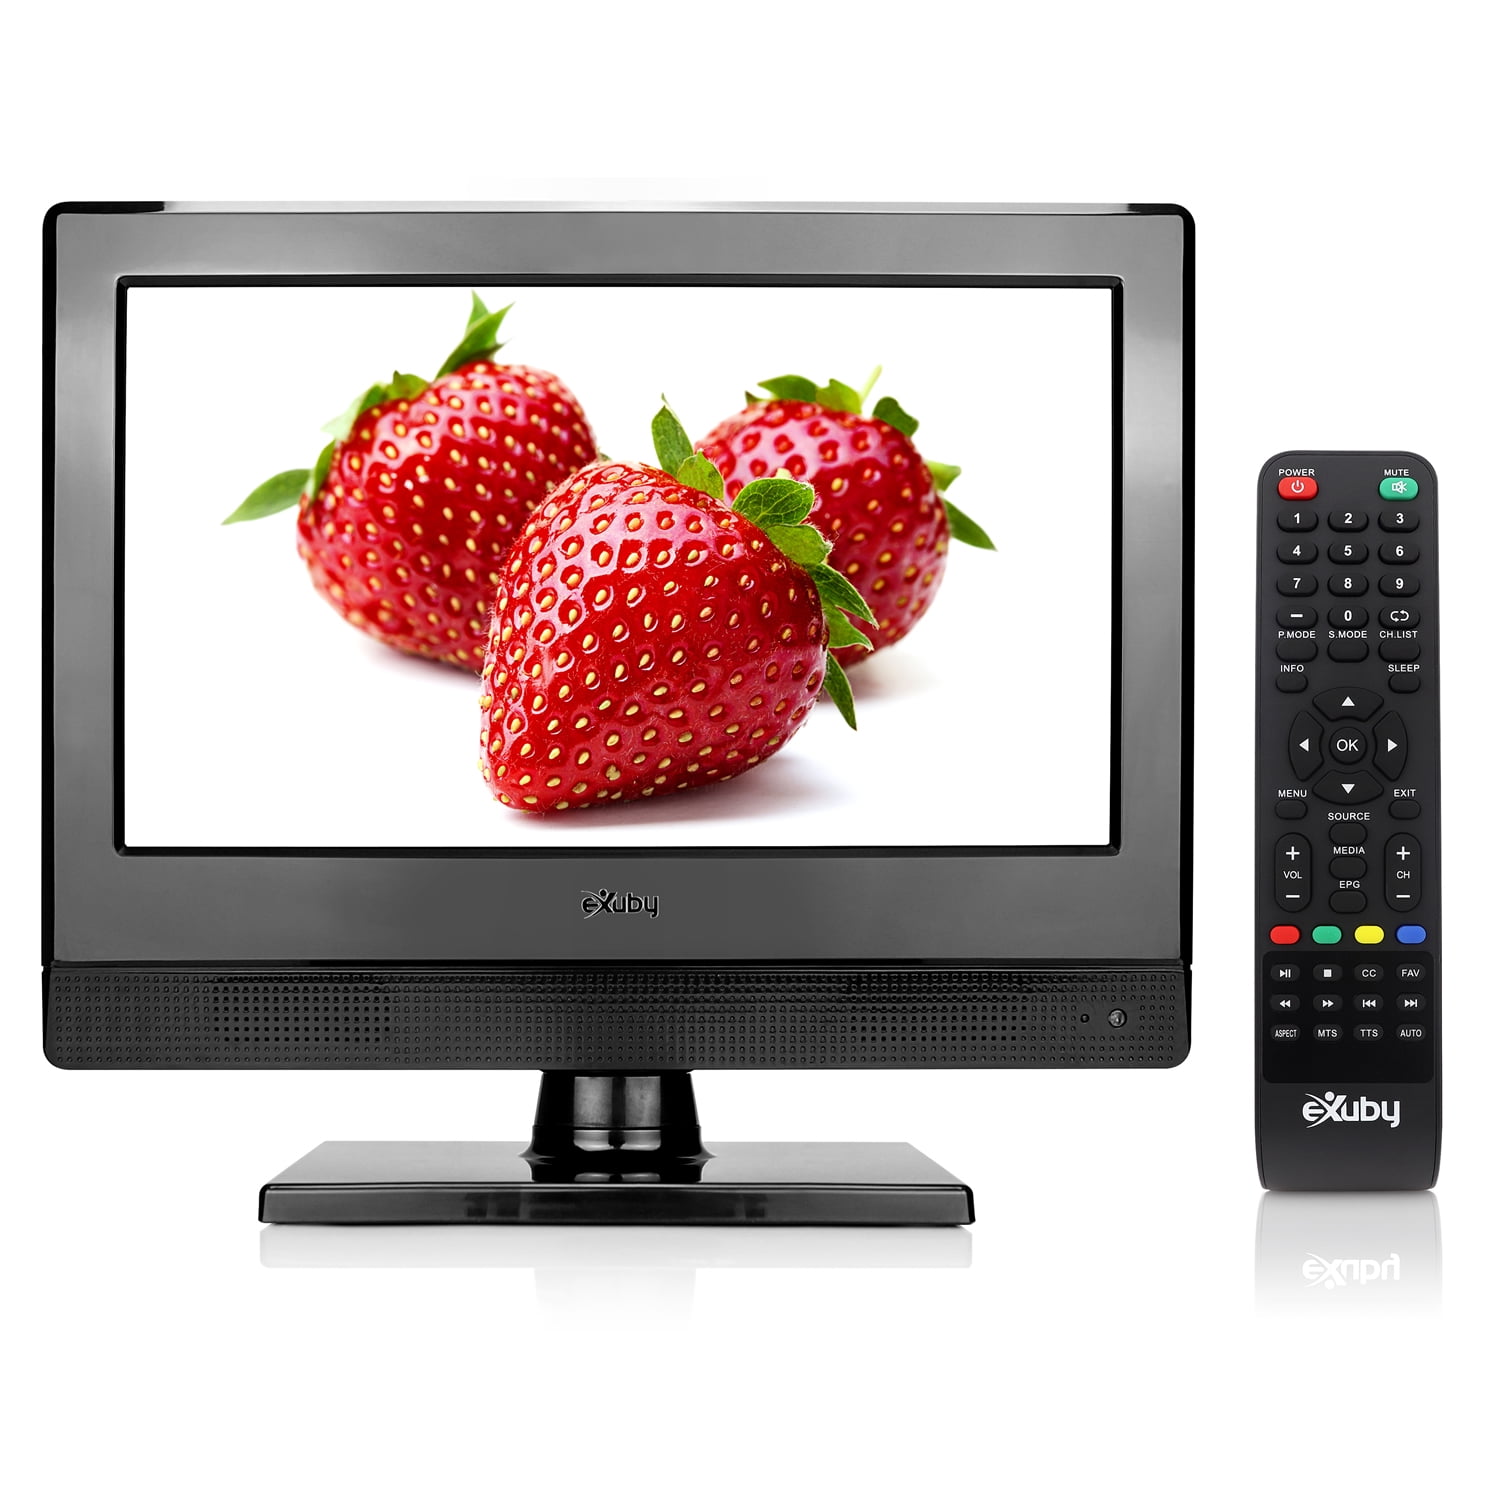 Small TV Perfect Kitchen TV 13.3 inch LED TV Watch HDTV Anywhere